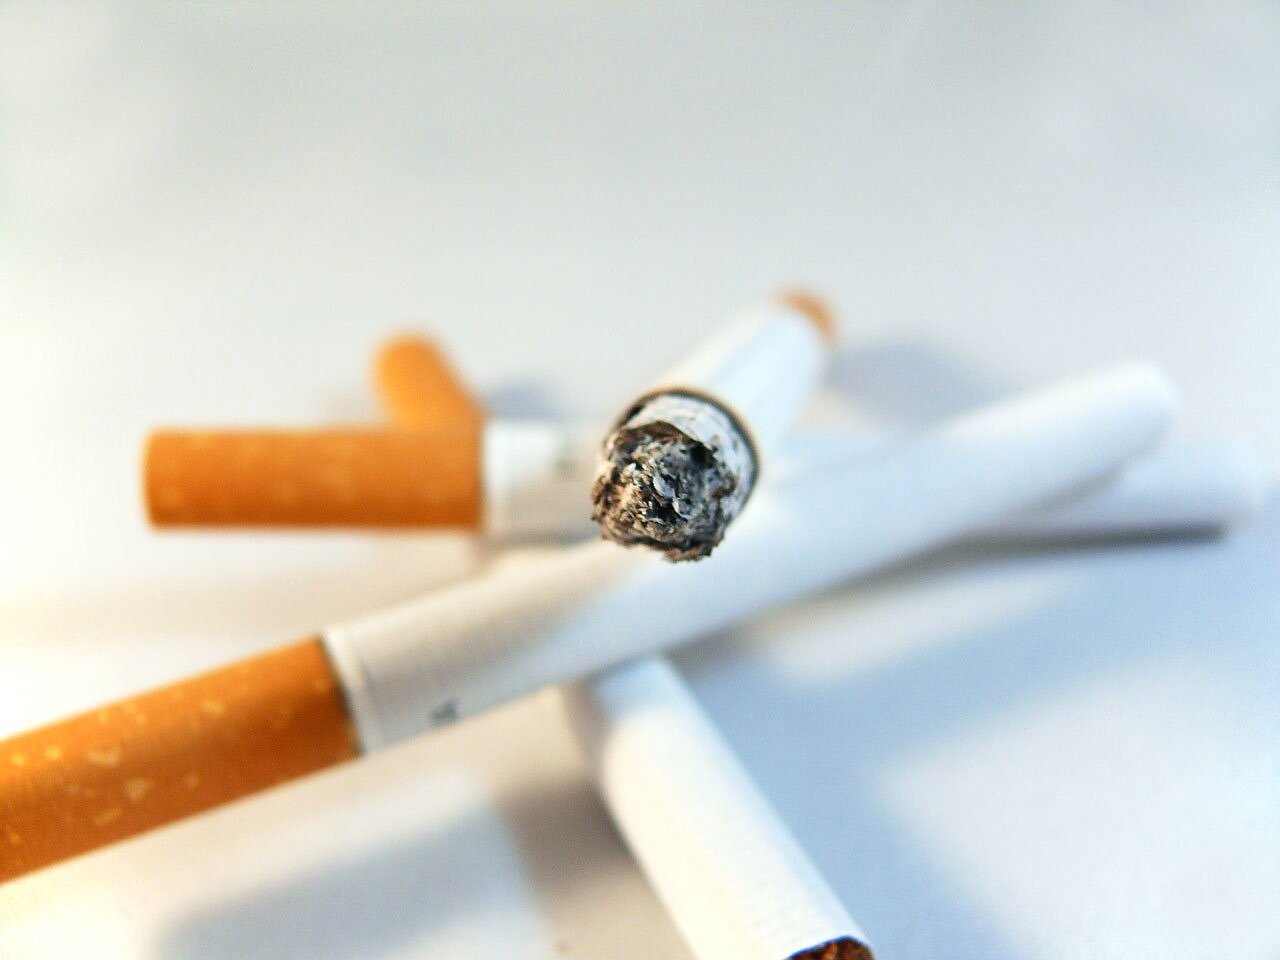 Menthol Cigarette Ban In The Us May Lower Number Of Smokers